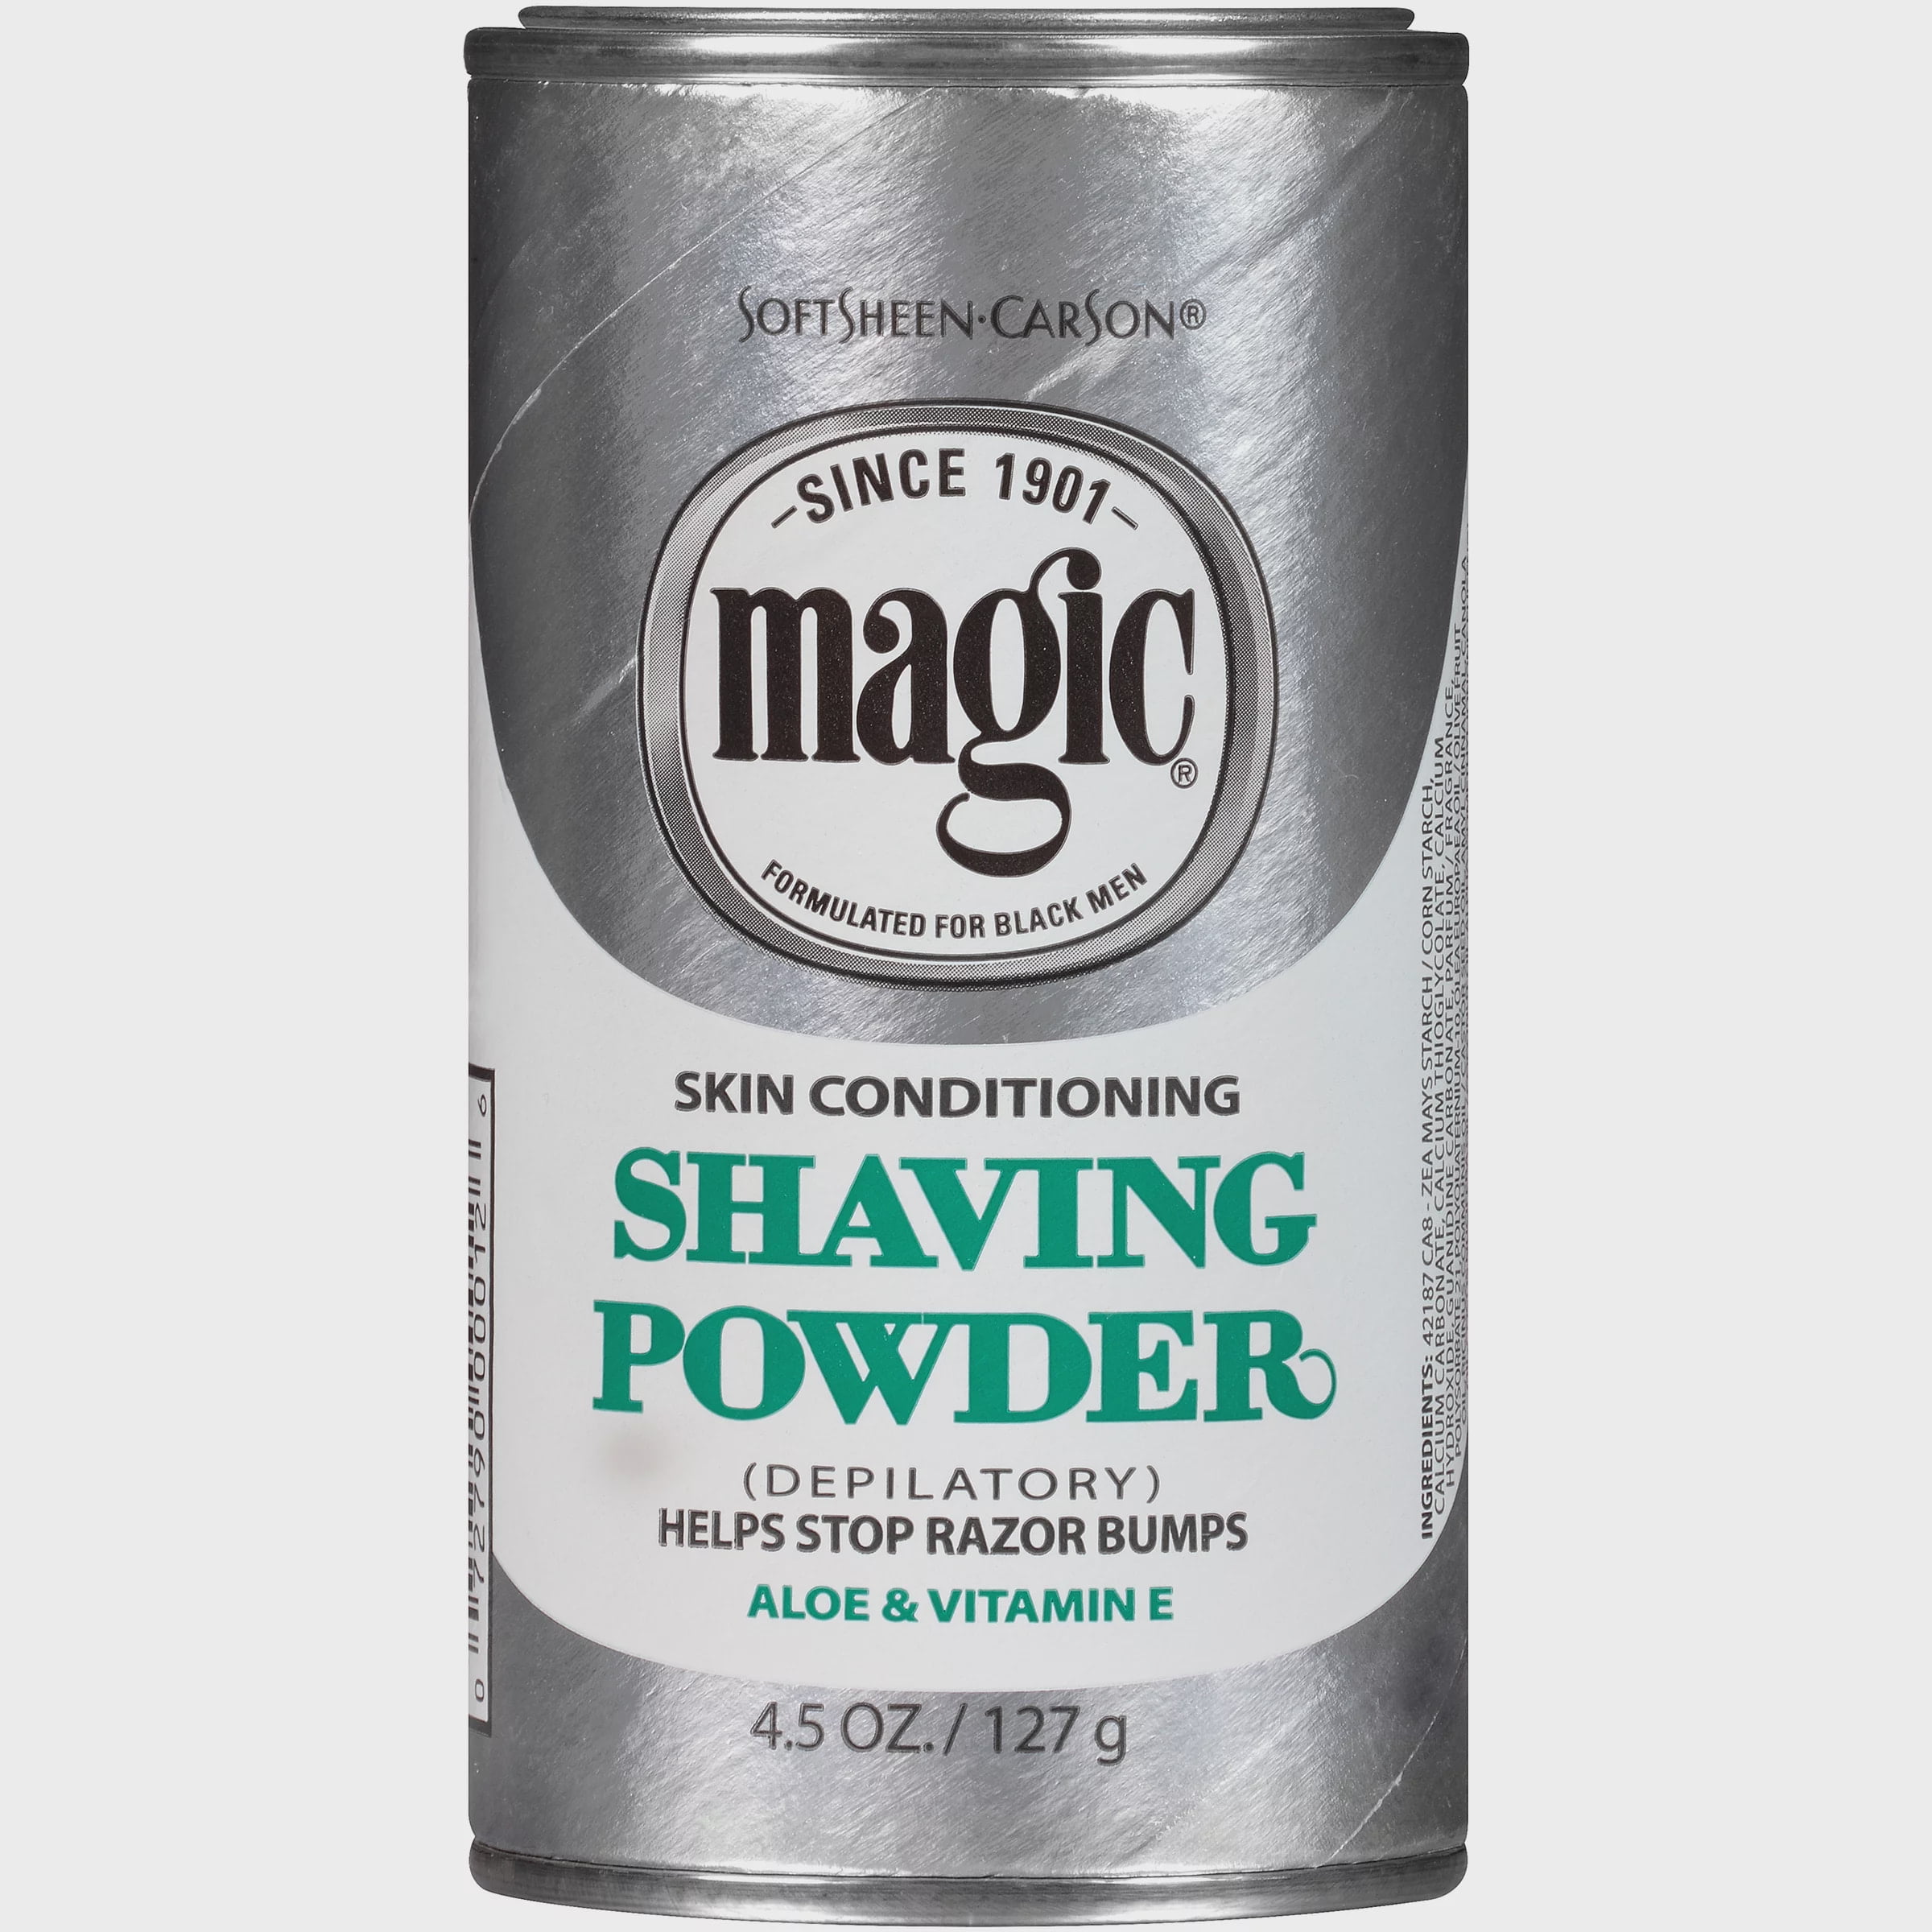 SoftSheen-Carson Magic Shave Power, Skin Conditioning Shaving Powder, with Vitamin E and Aloe, Depilatory, 5 oz picture